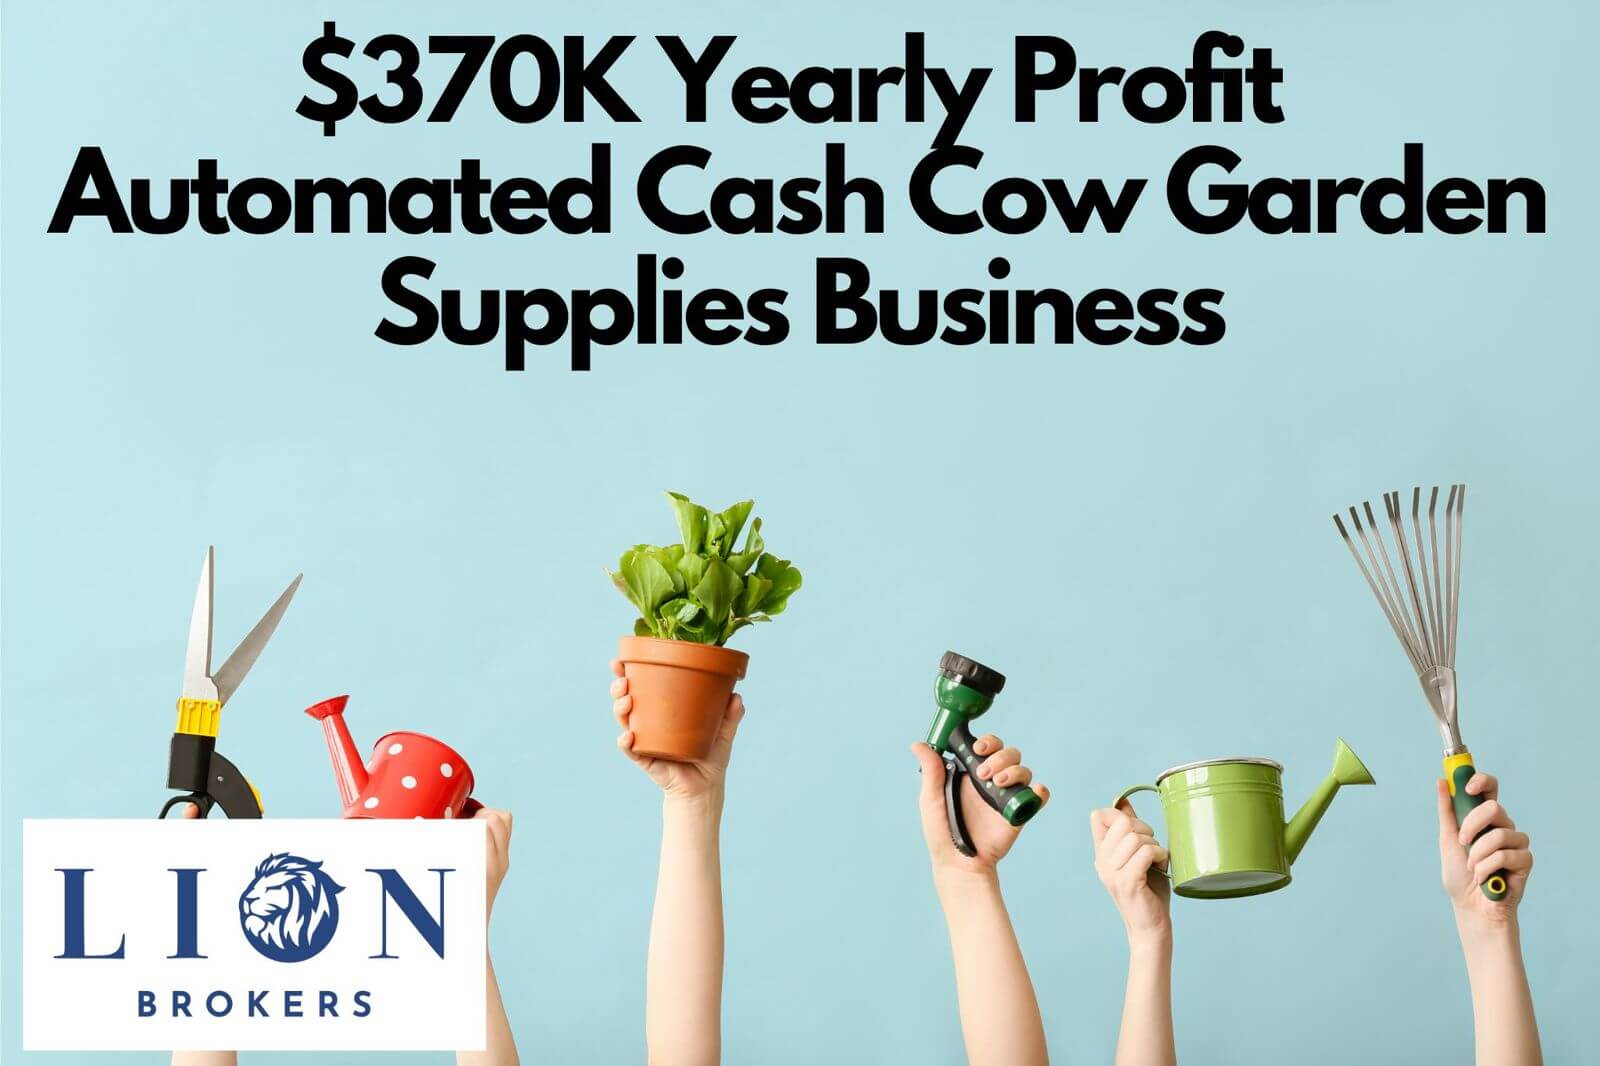 (Sold) 370K Yearly Profit Automated Cash Cow Garden Supplies Business